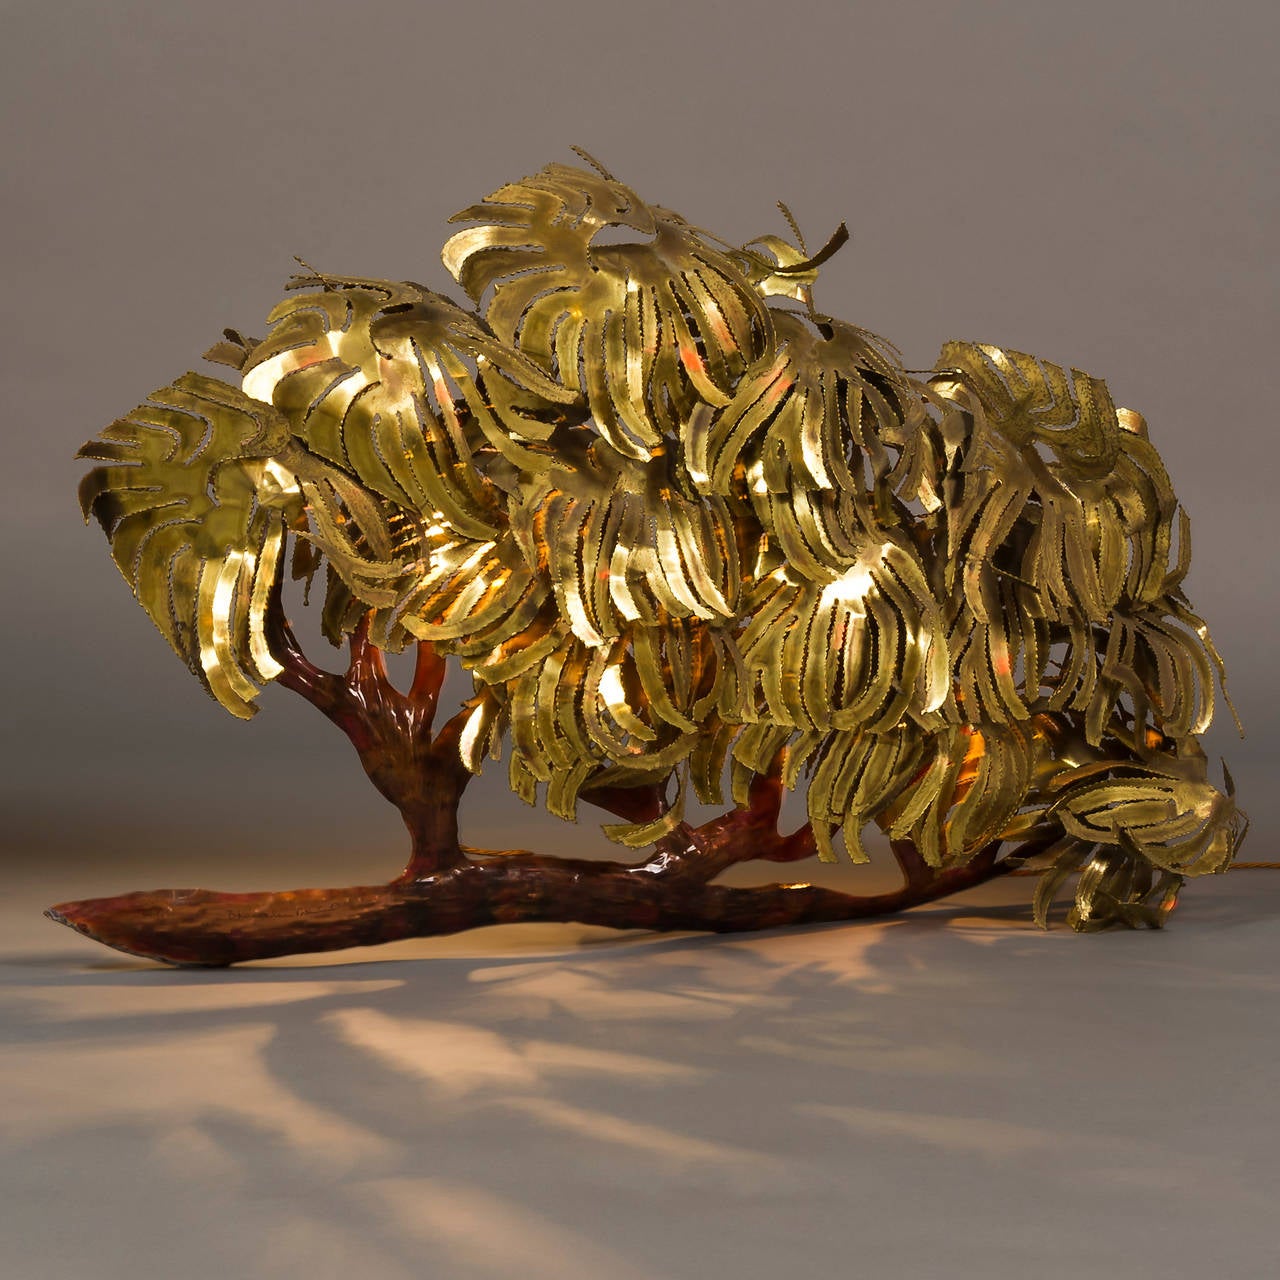 Large illuminated brass and copper tree wall sculpture by Daniel Dhaseleer, Belgium, 1970s signed.